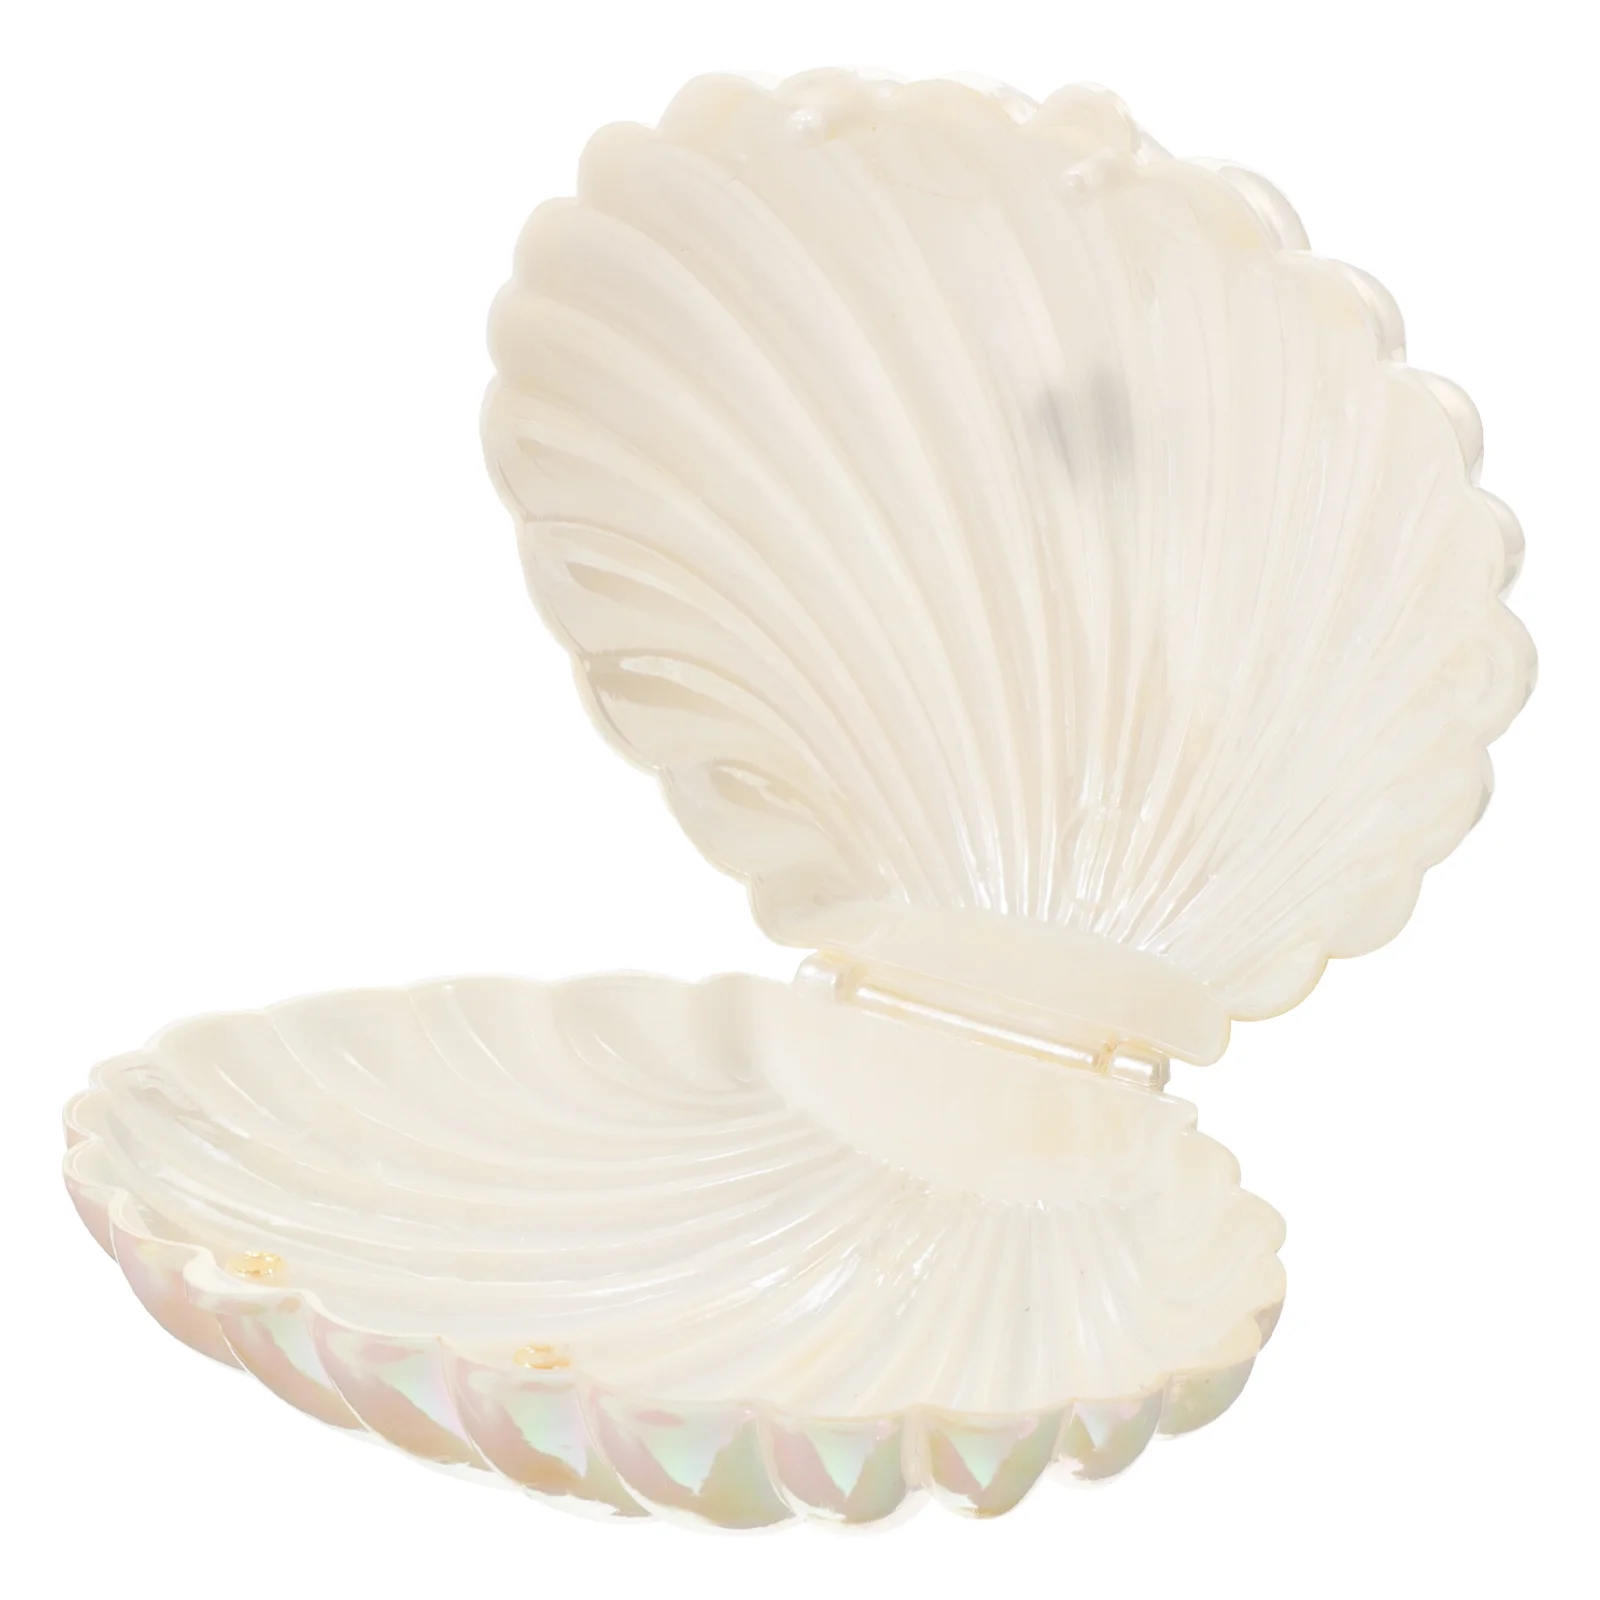 

Sundries Storage Case Jewelry Container Ring Holder Shell Trinket Dish Seashell Decorative Tray